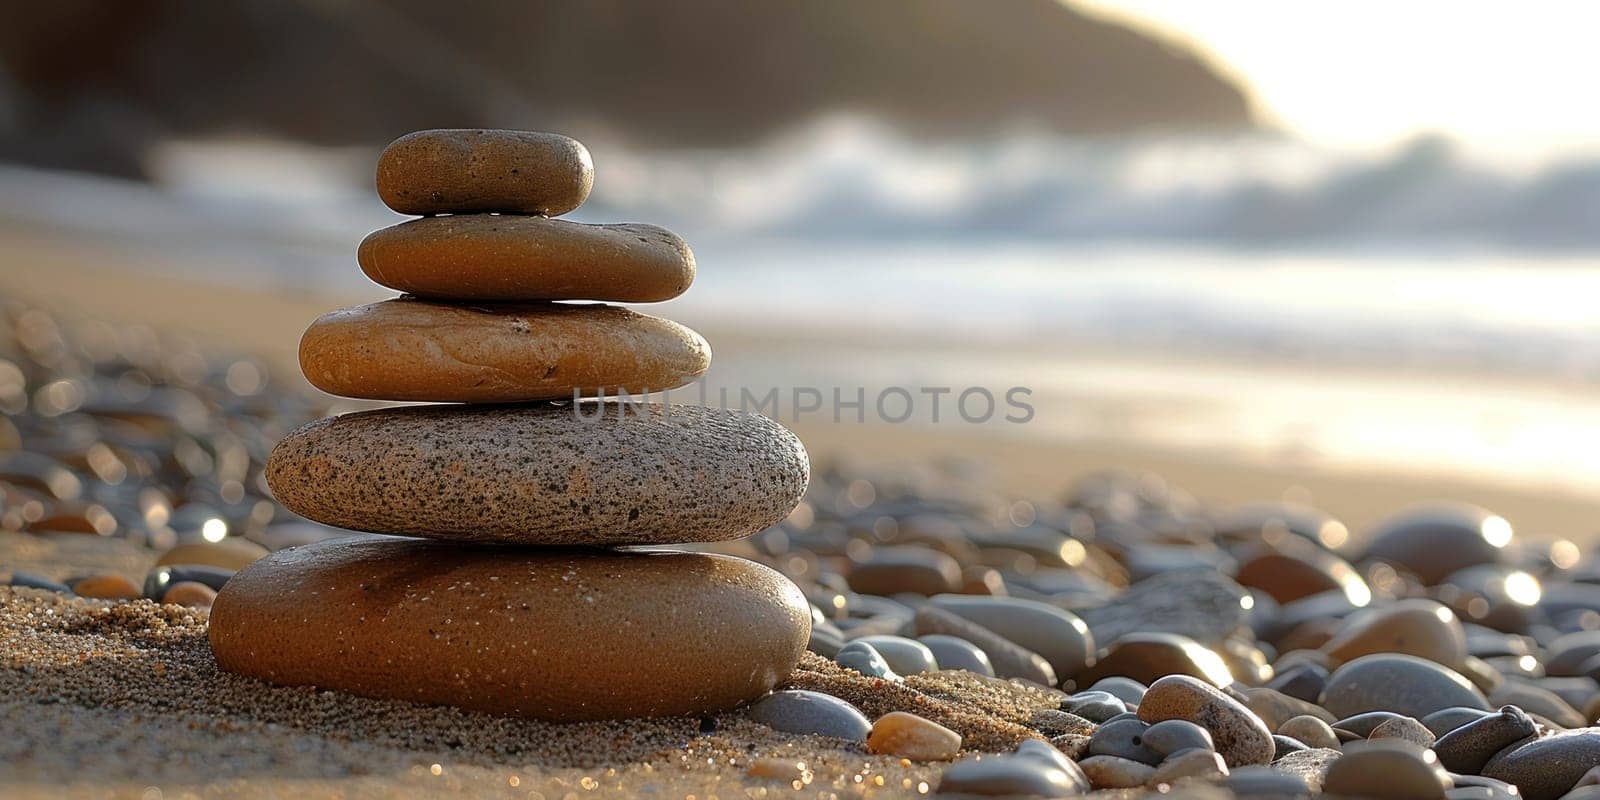 A stack of rocks on a beach. The rocks are of different sizes and are arranged in a pyramid shape. Concept of tranquility and peace, as the rocks are placed on the sand, creating a serene